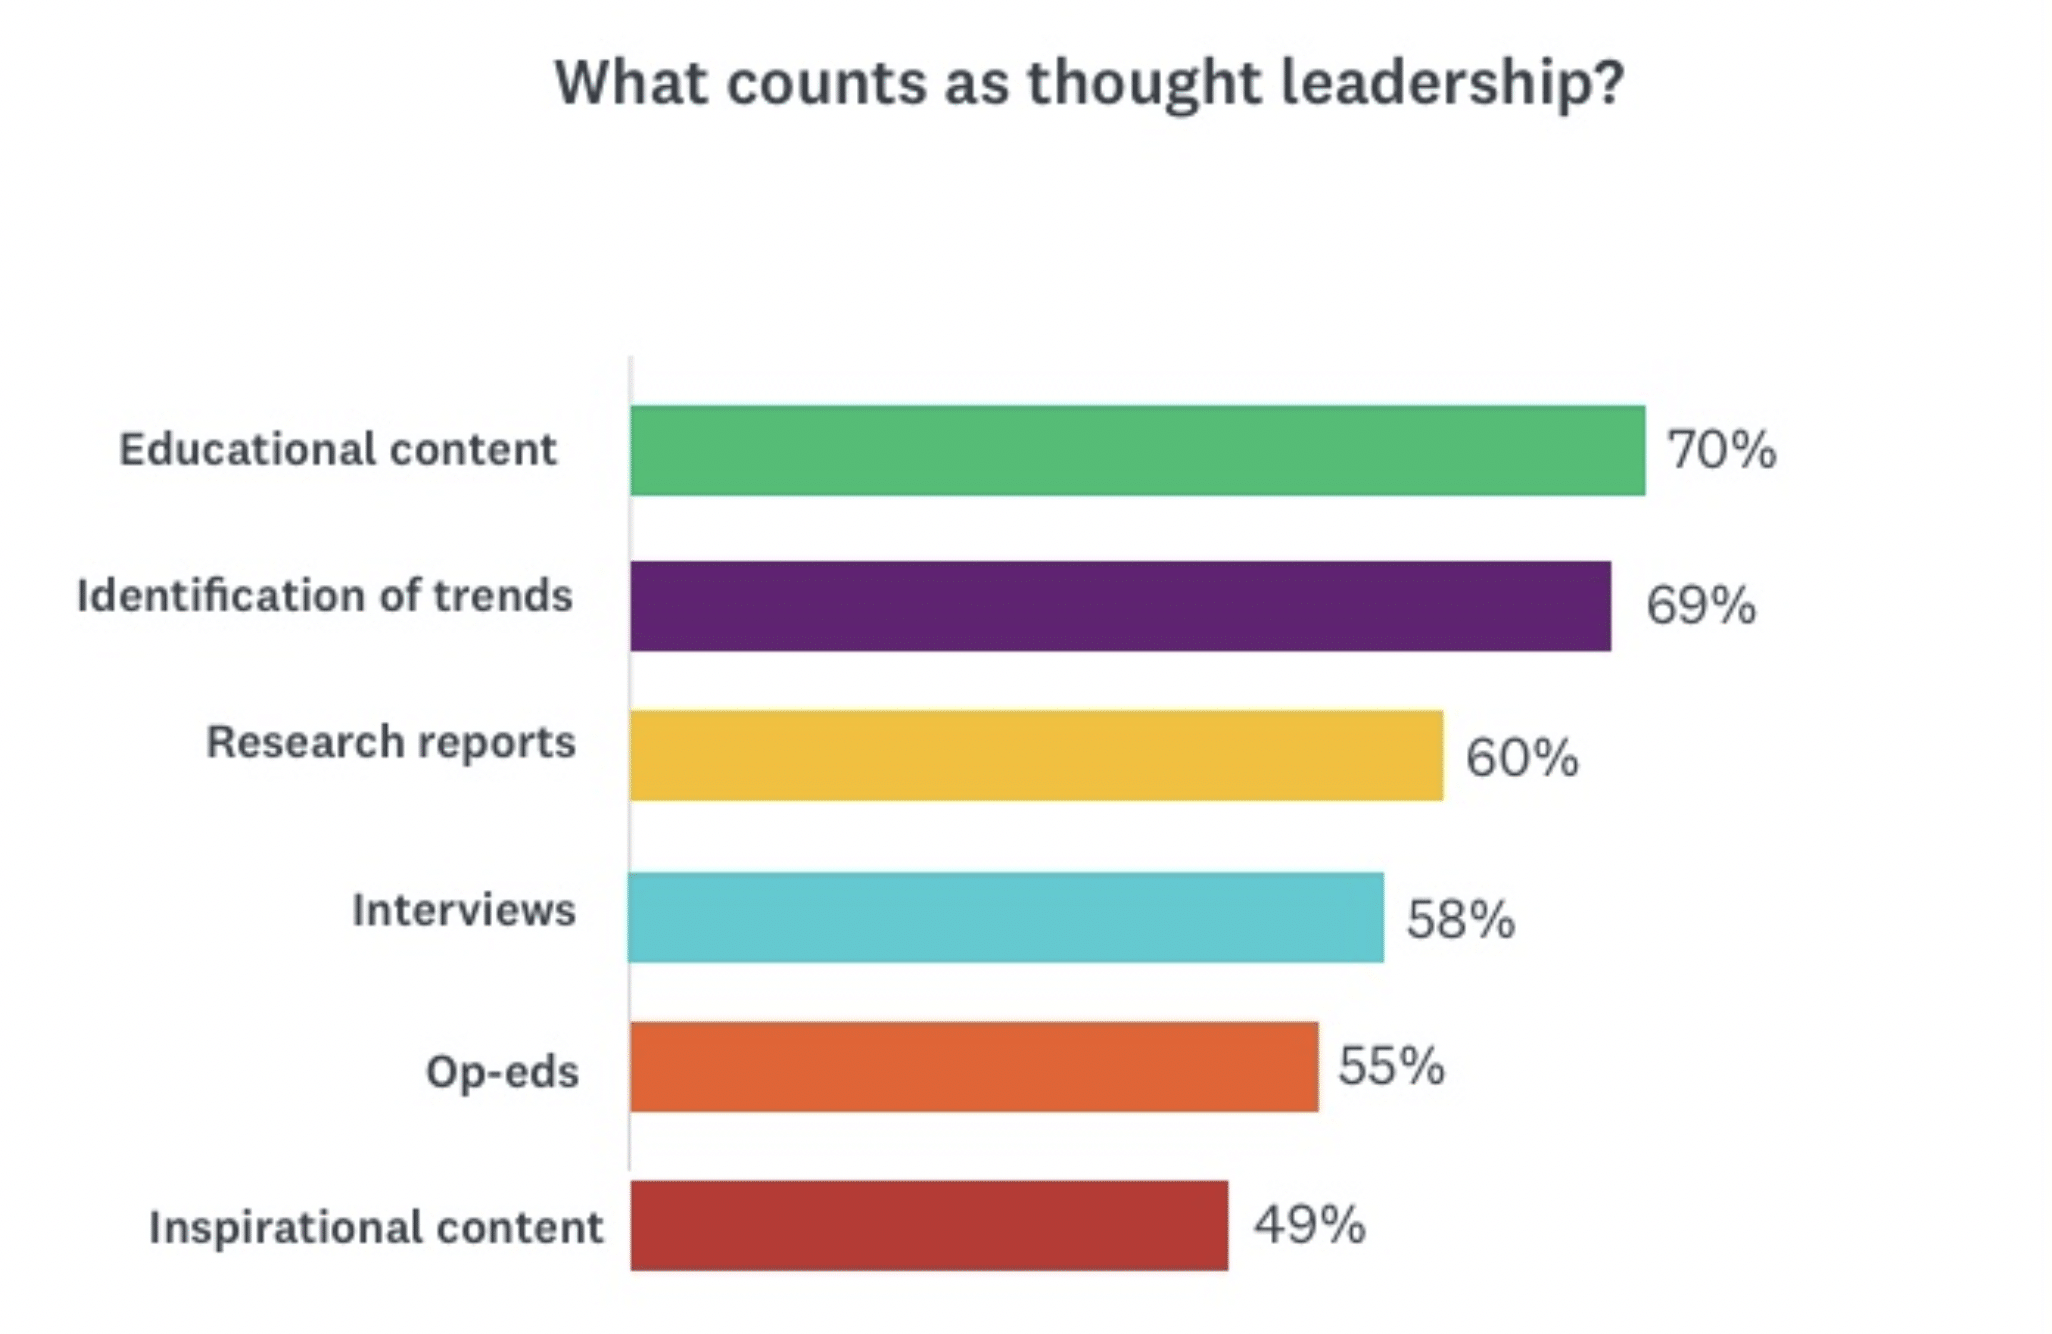 bar graph shows the most popular types of thought leadership content